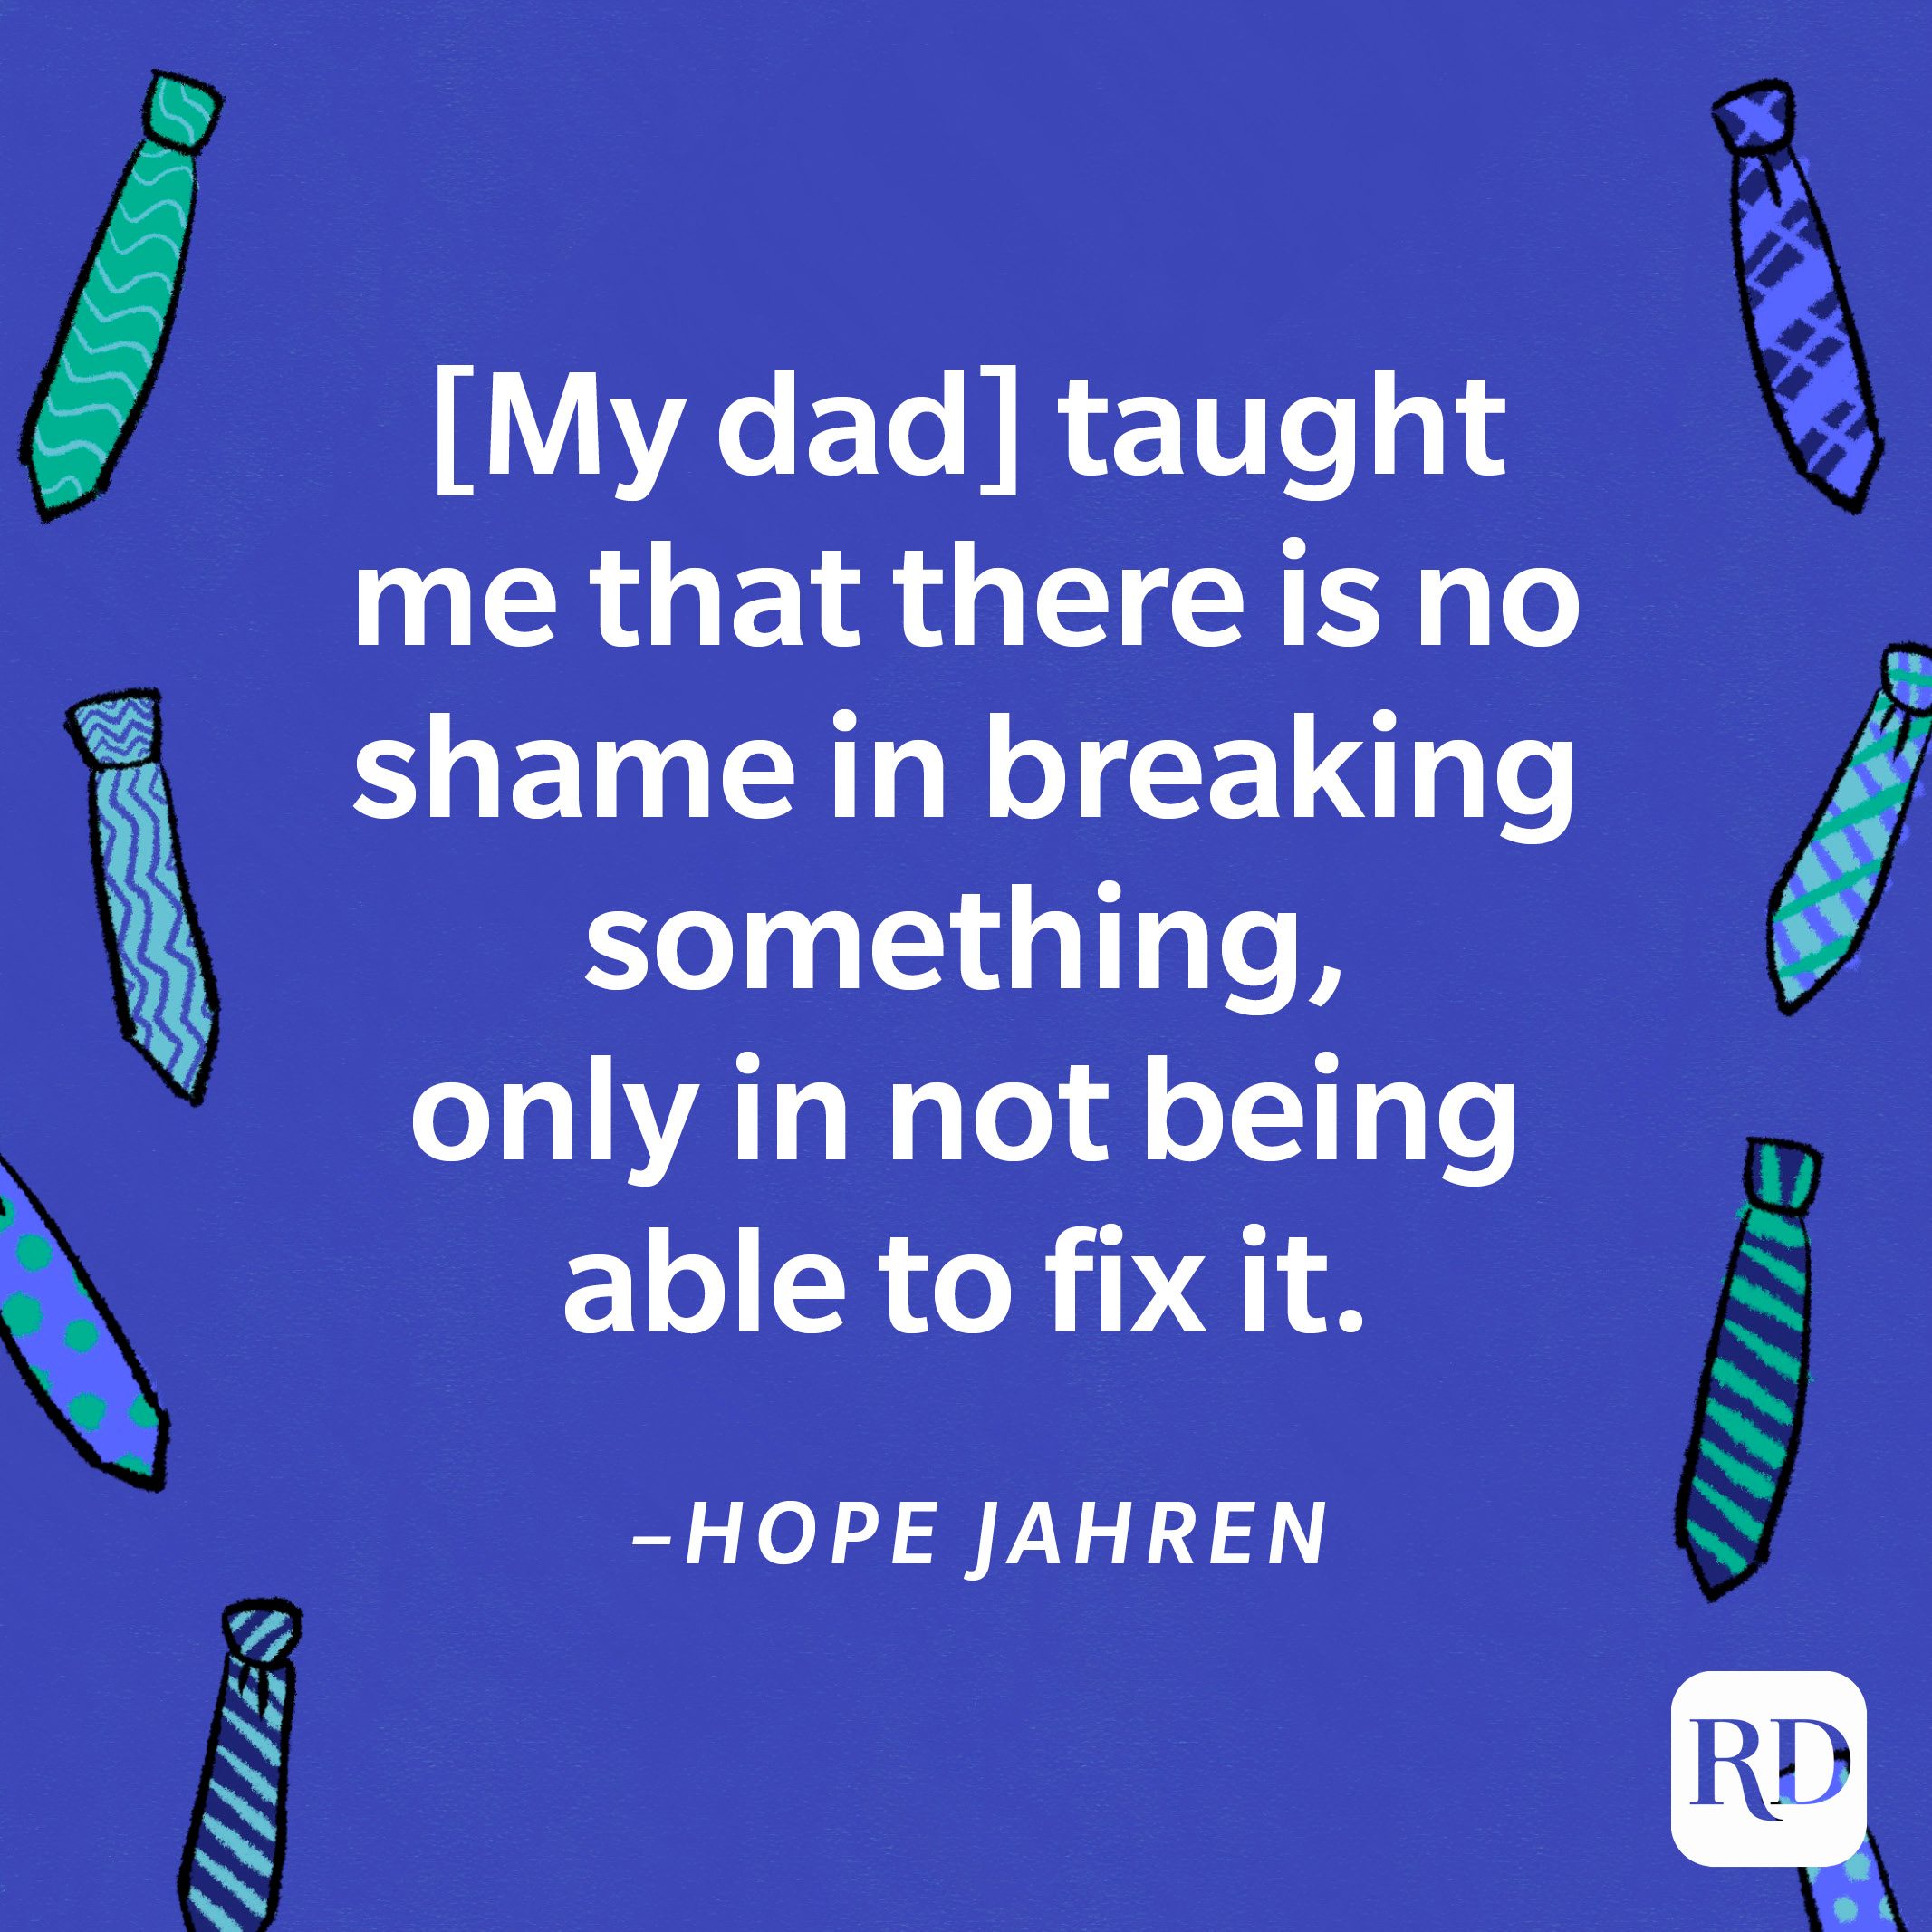 “[My dad] taught me that there is no shame in breaking something, only in not being able to fix it.”—Hope Jahren 13